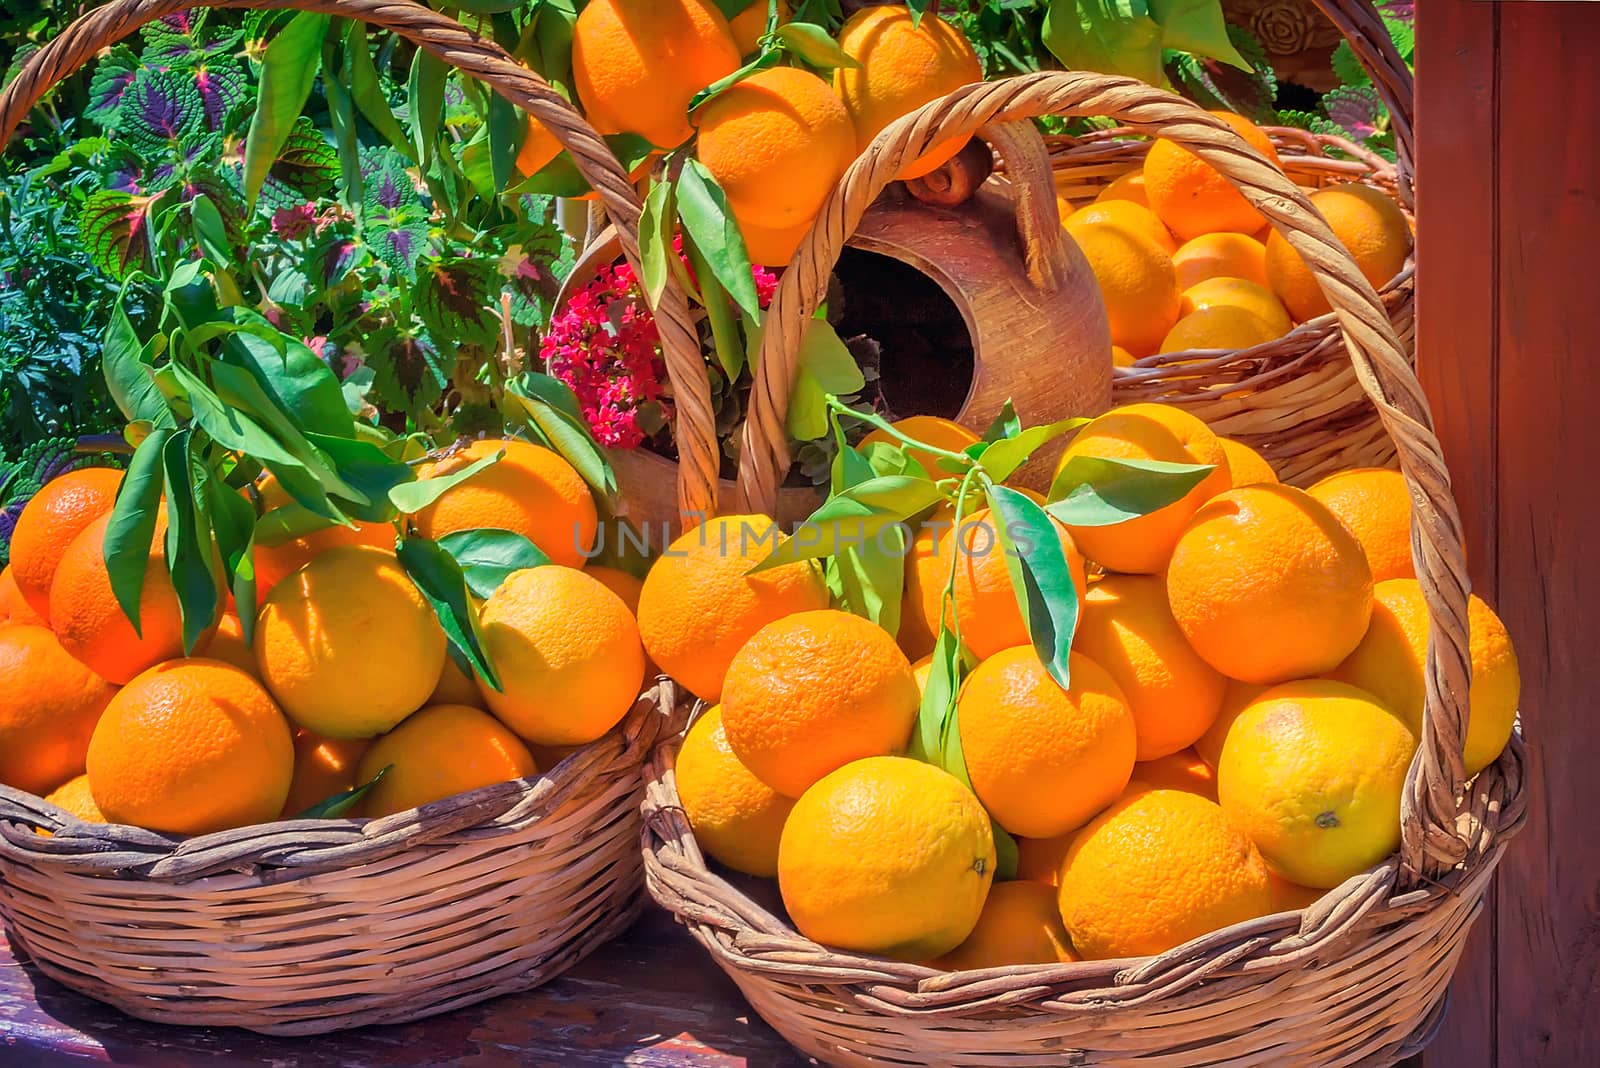 Wicker basket full of large ripe oranges, decorated with green branches and flowers. Presents closeup.